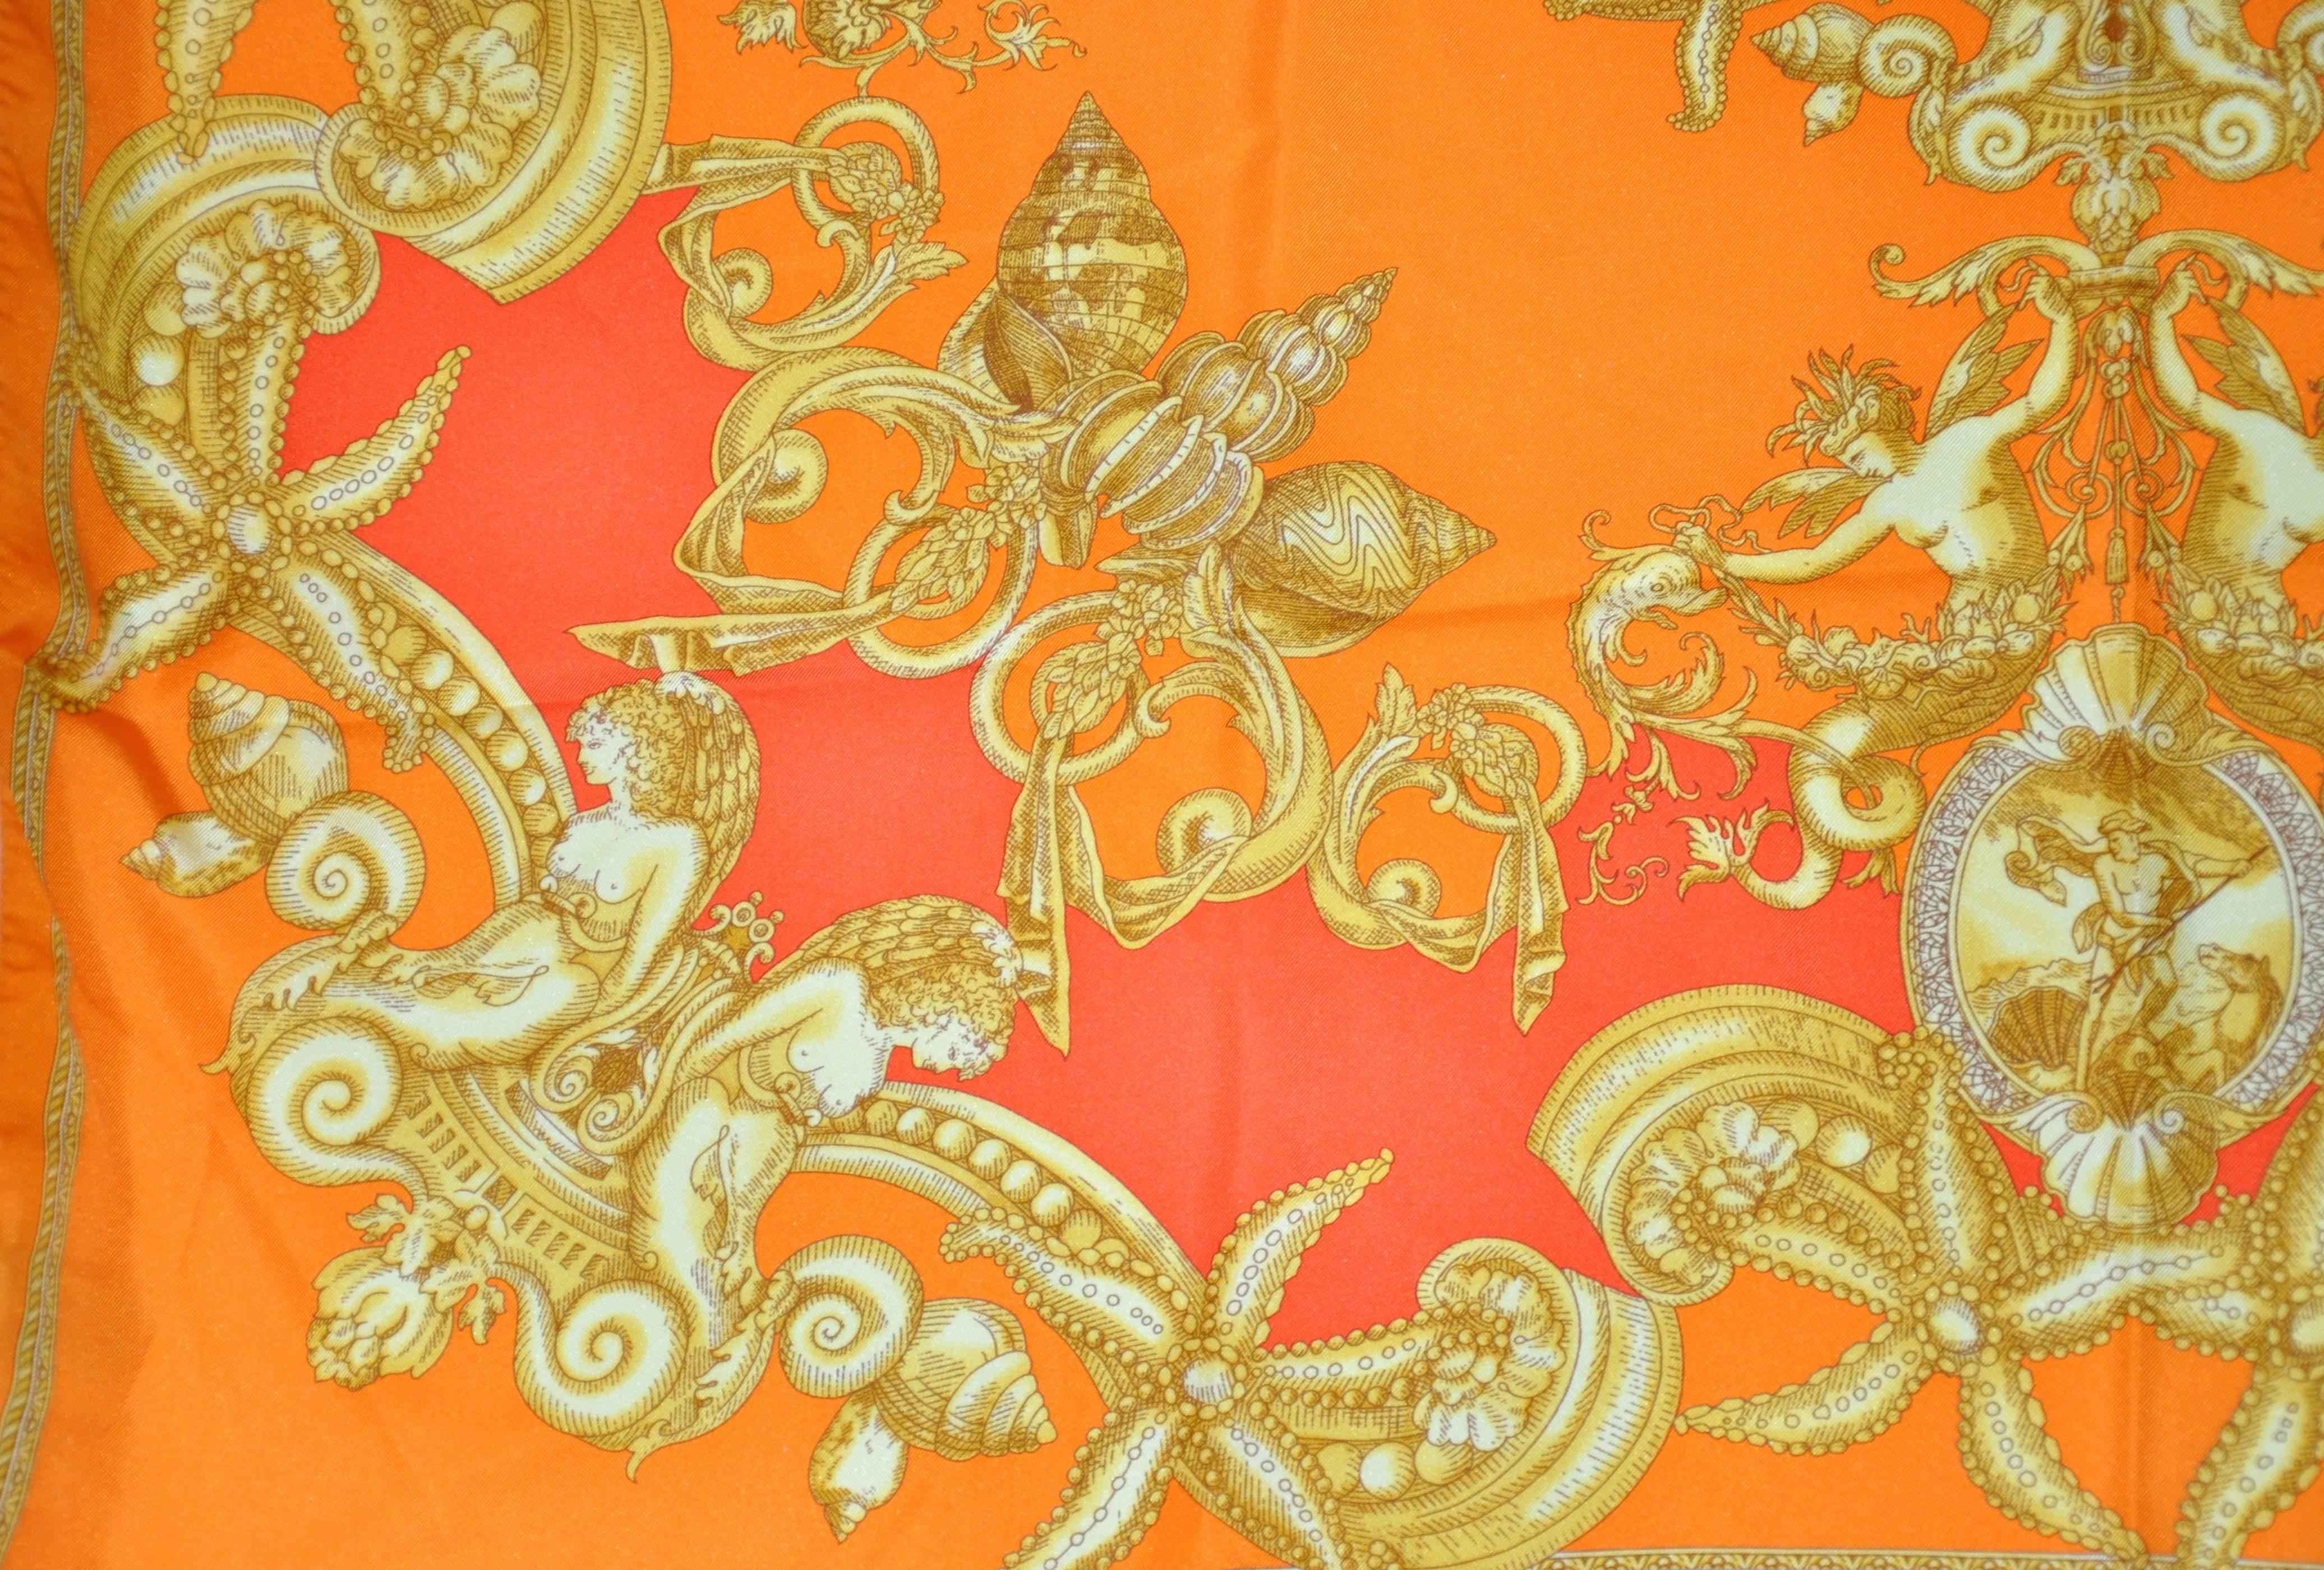 Gianni Versace Bold and Vivid Shades of Tangerines and Gold Silk Scarf In Good Condition For Sale In New York, NY